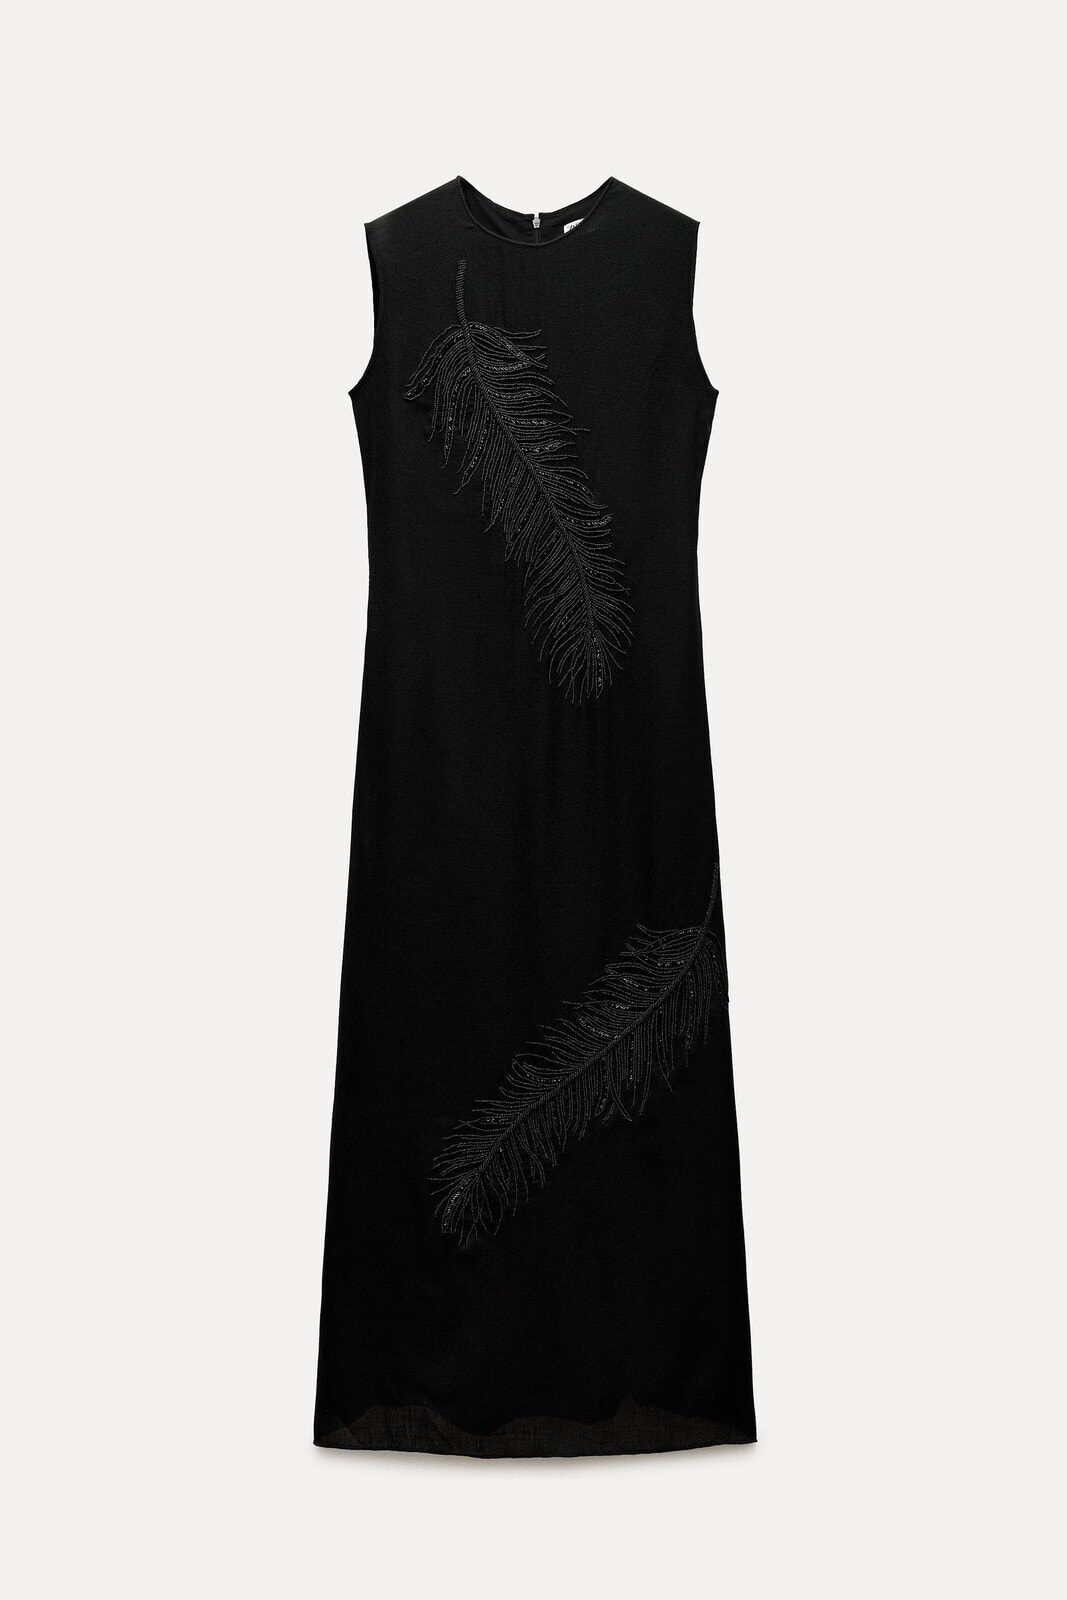 Zw collection embroidered midi dress